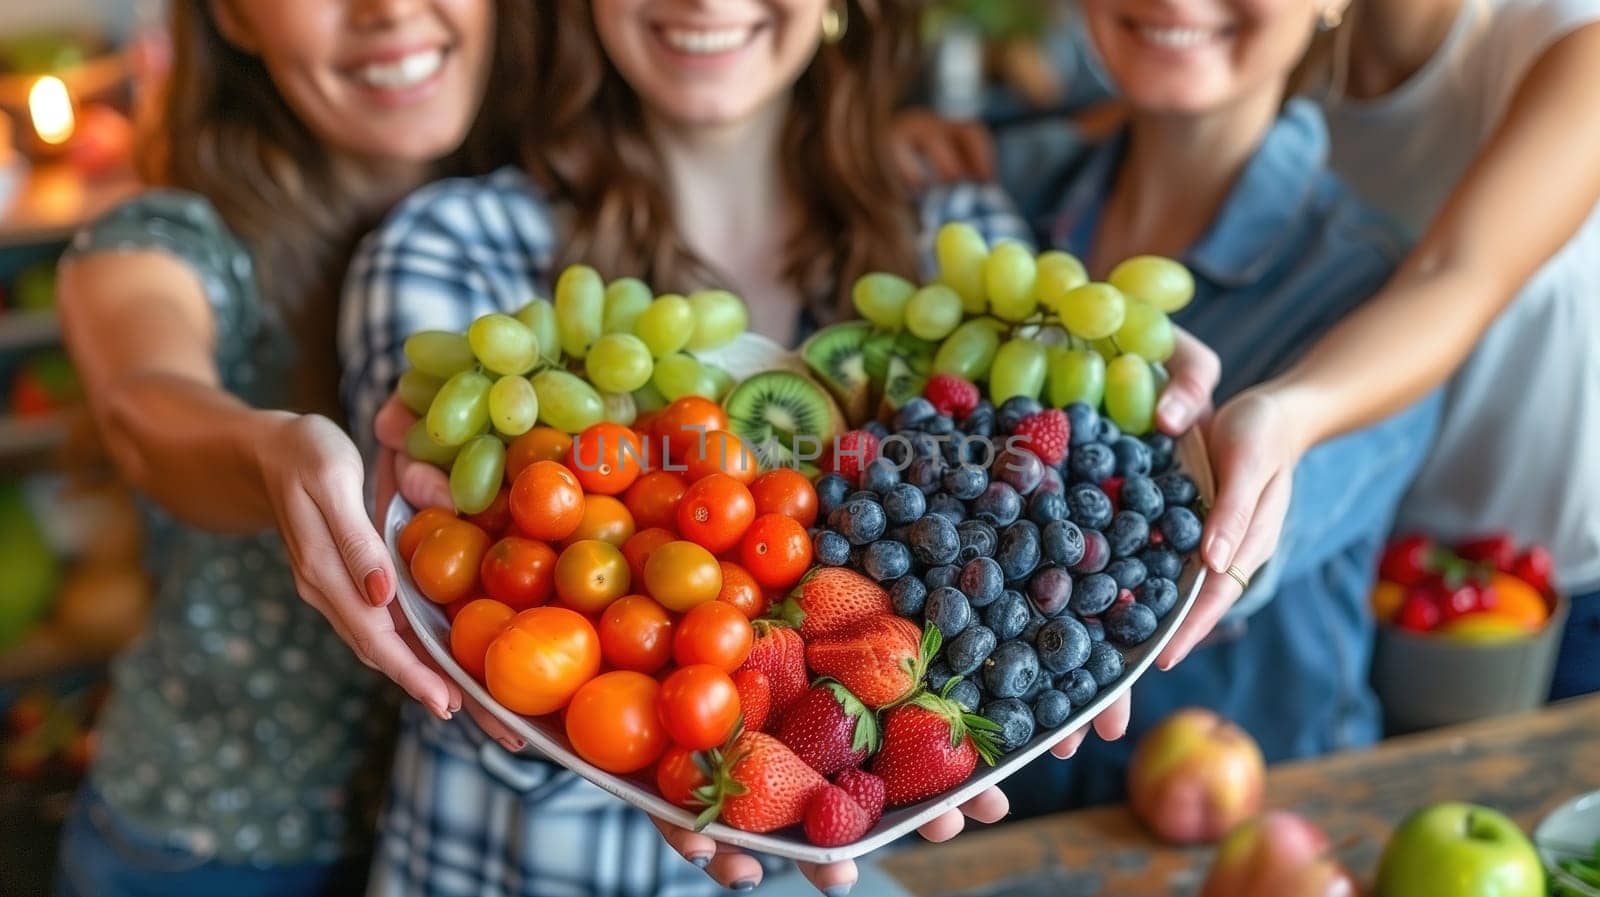 A group of women standing together, holding a plate filled with a variety of fresh fruits. The women appear to be smiling and sharing the fruit among themselves.